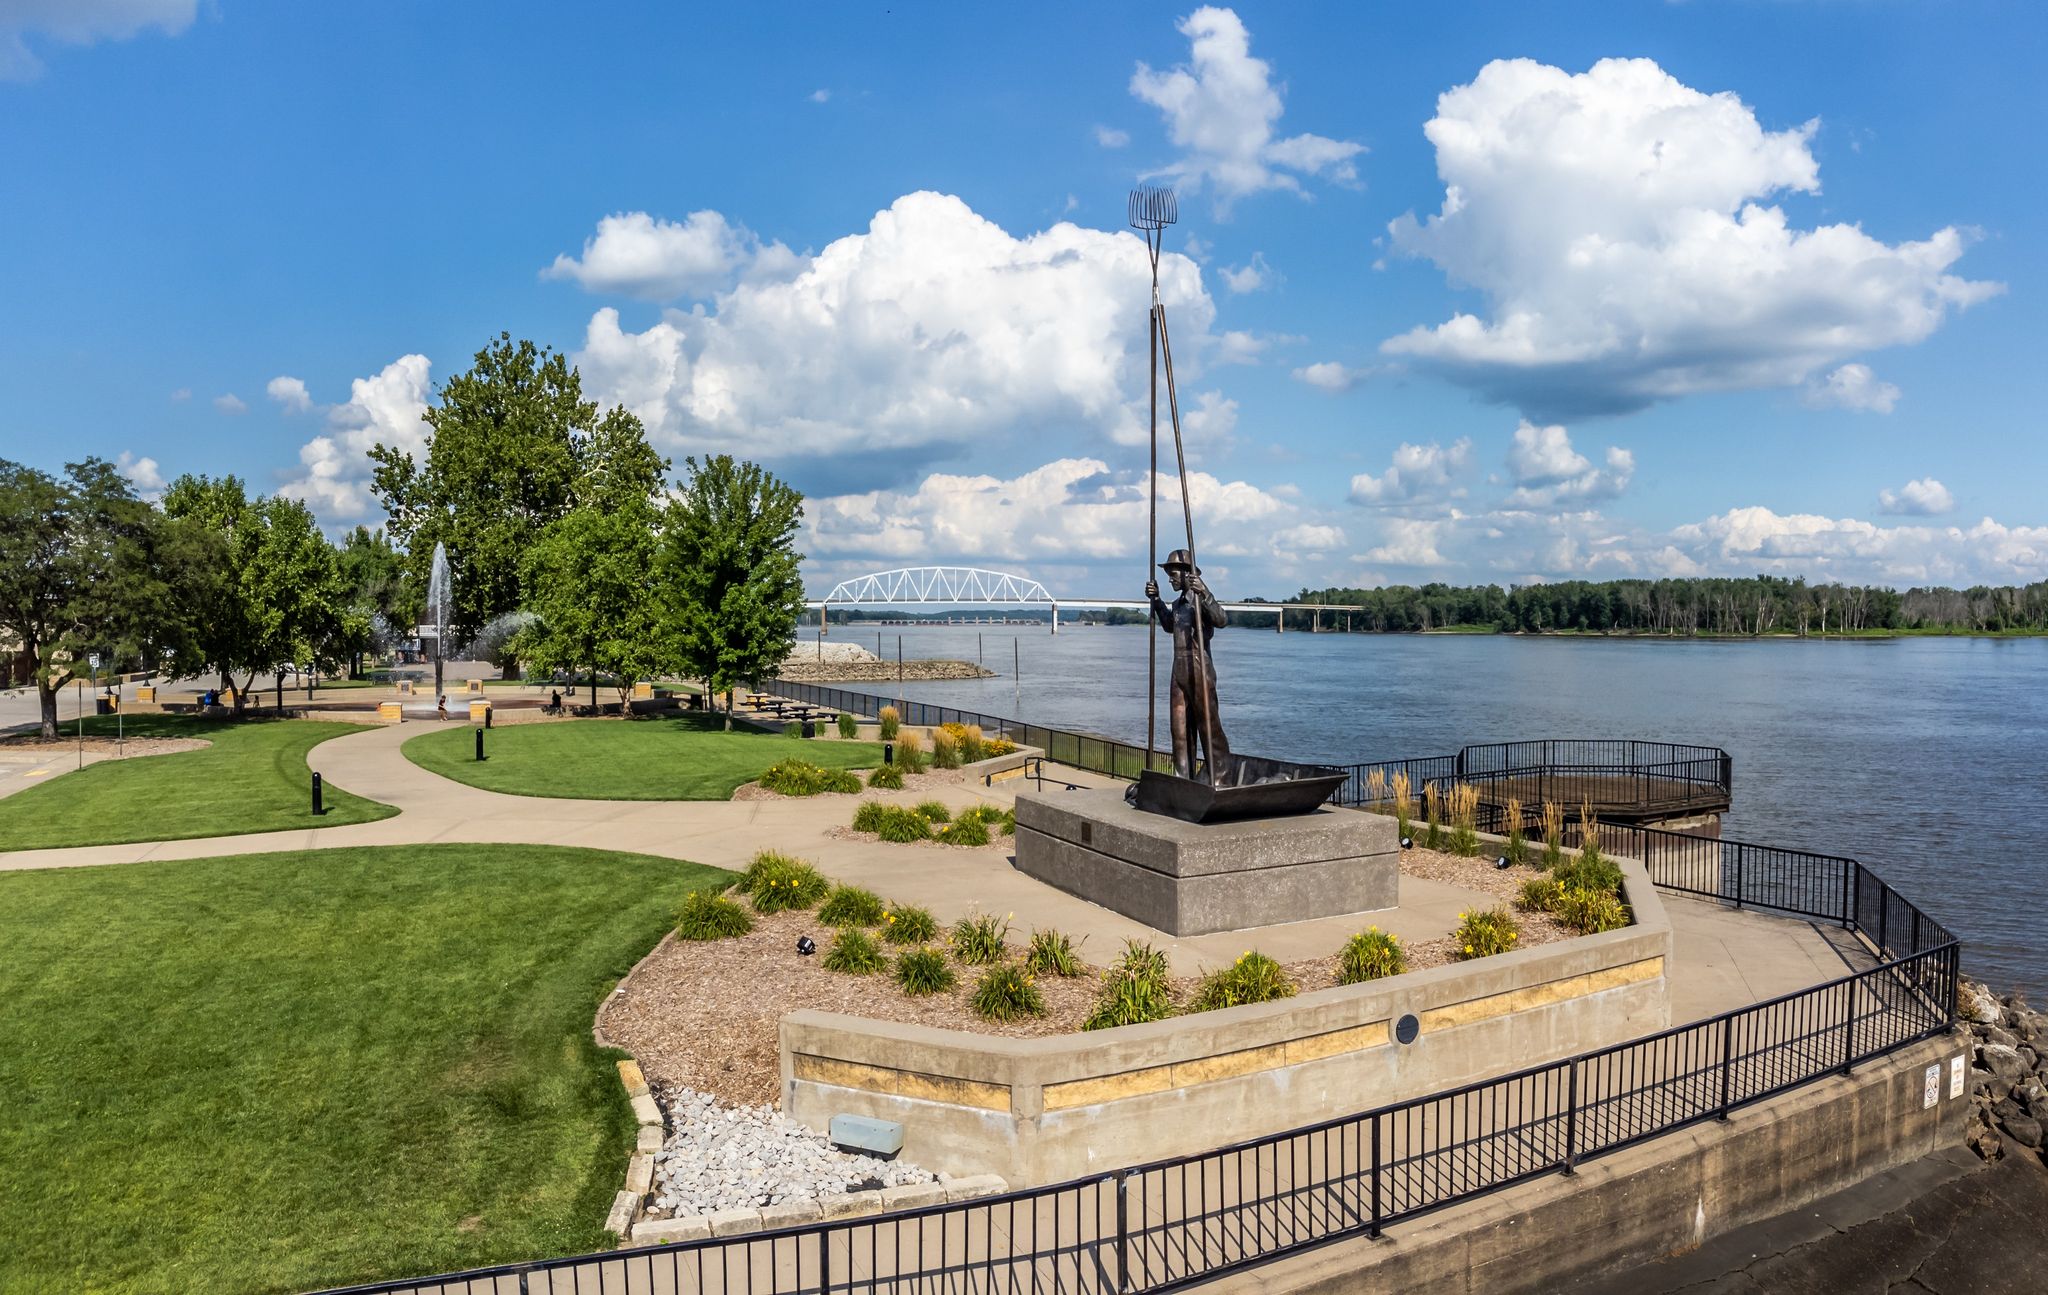 drone shot of riverfront with sculpture of a man and bridge in the background